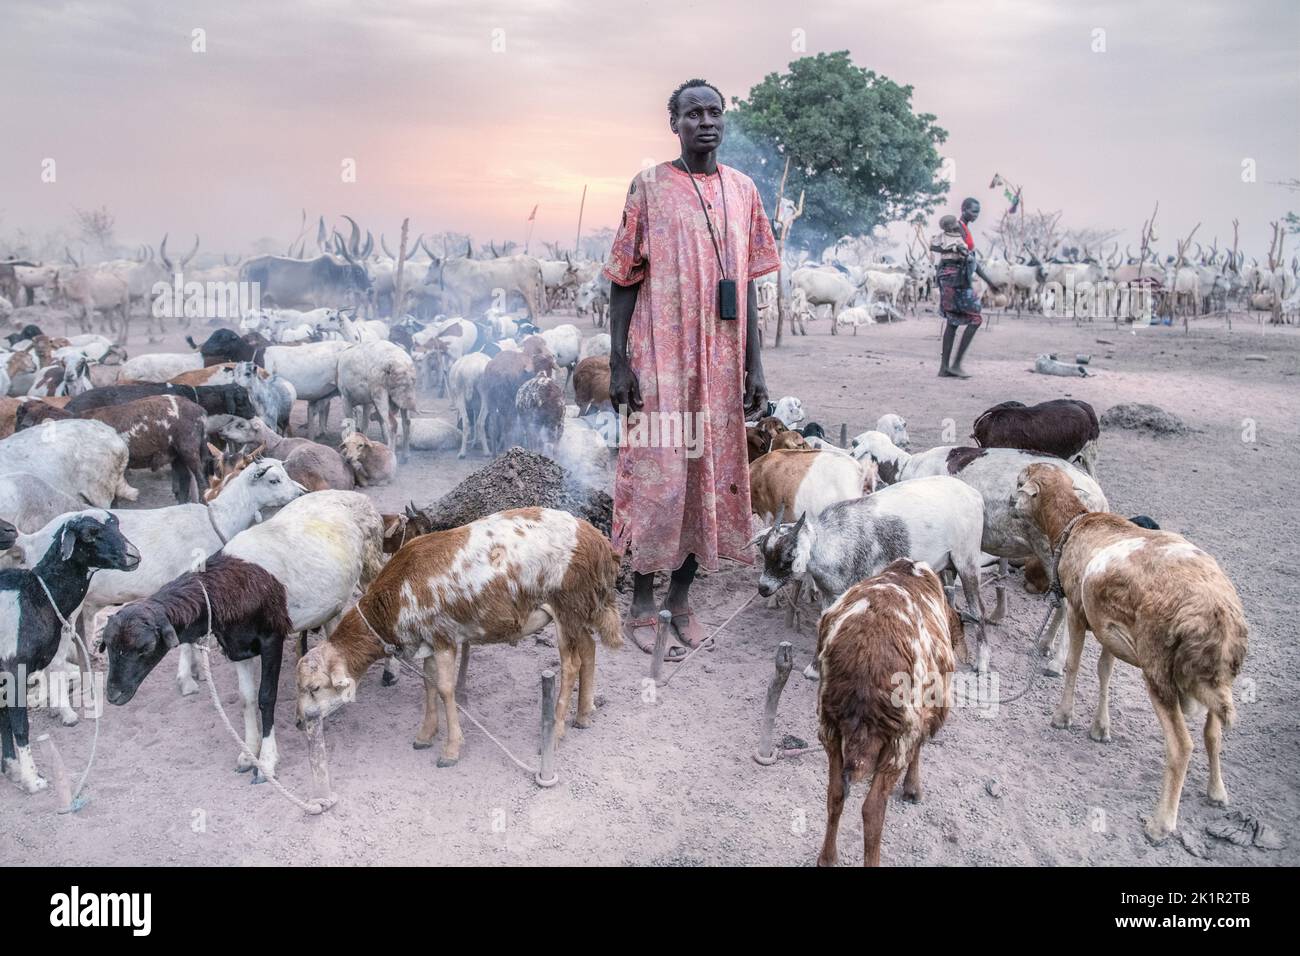 A herder with goats. South Sudan: THESE STUNNING images show the incredible bond between the Mundari people and their cattle in South Sudan. One image Stock Photo